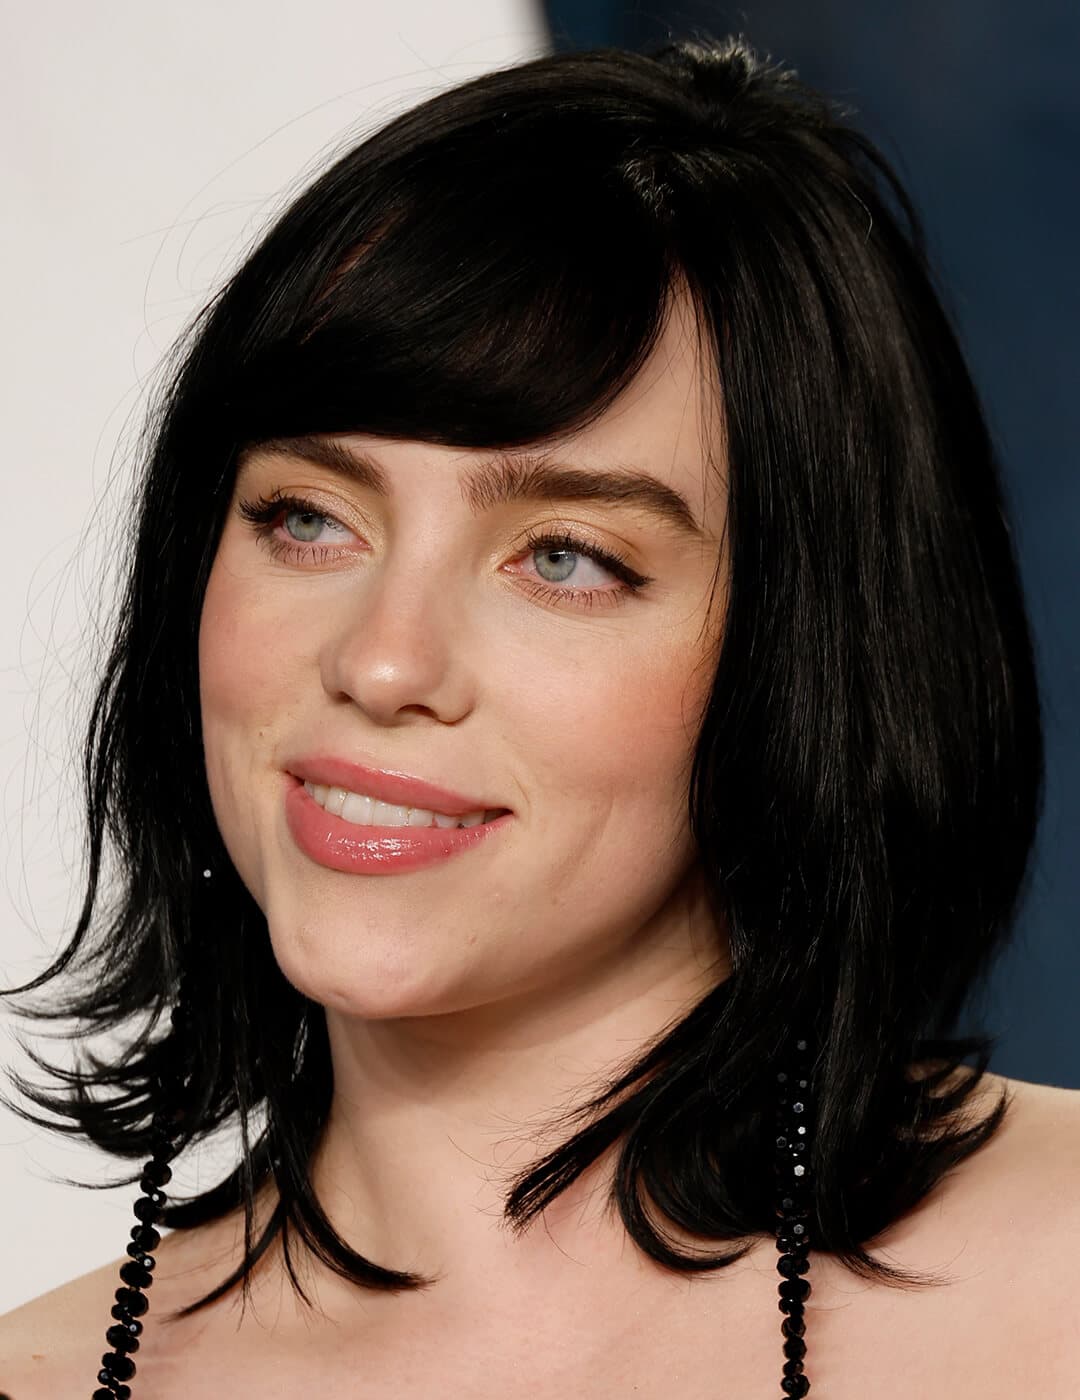 A photo of Billie Eilish with her black medium-length bob cut while looking and smiling sideways